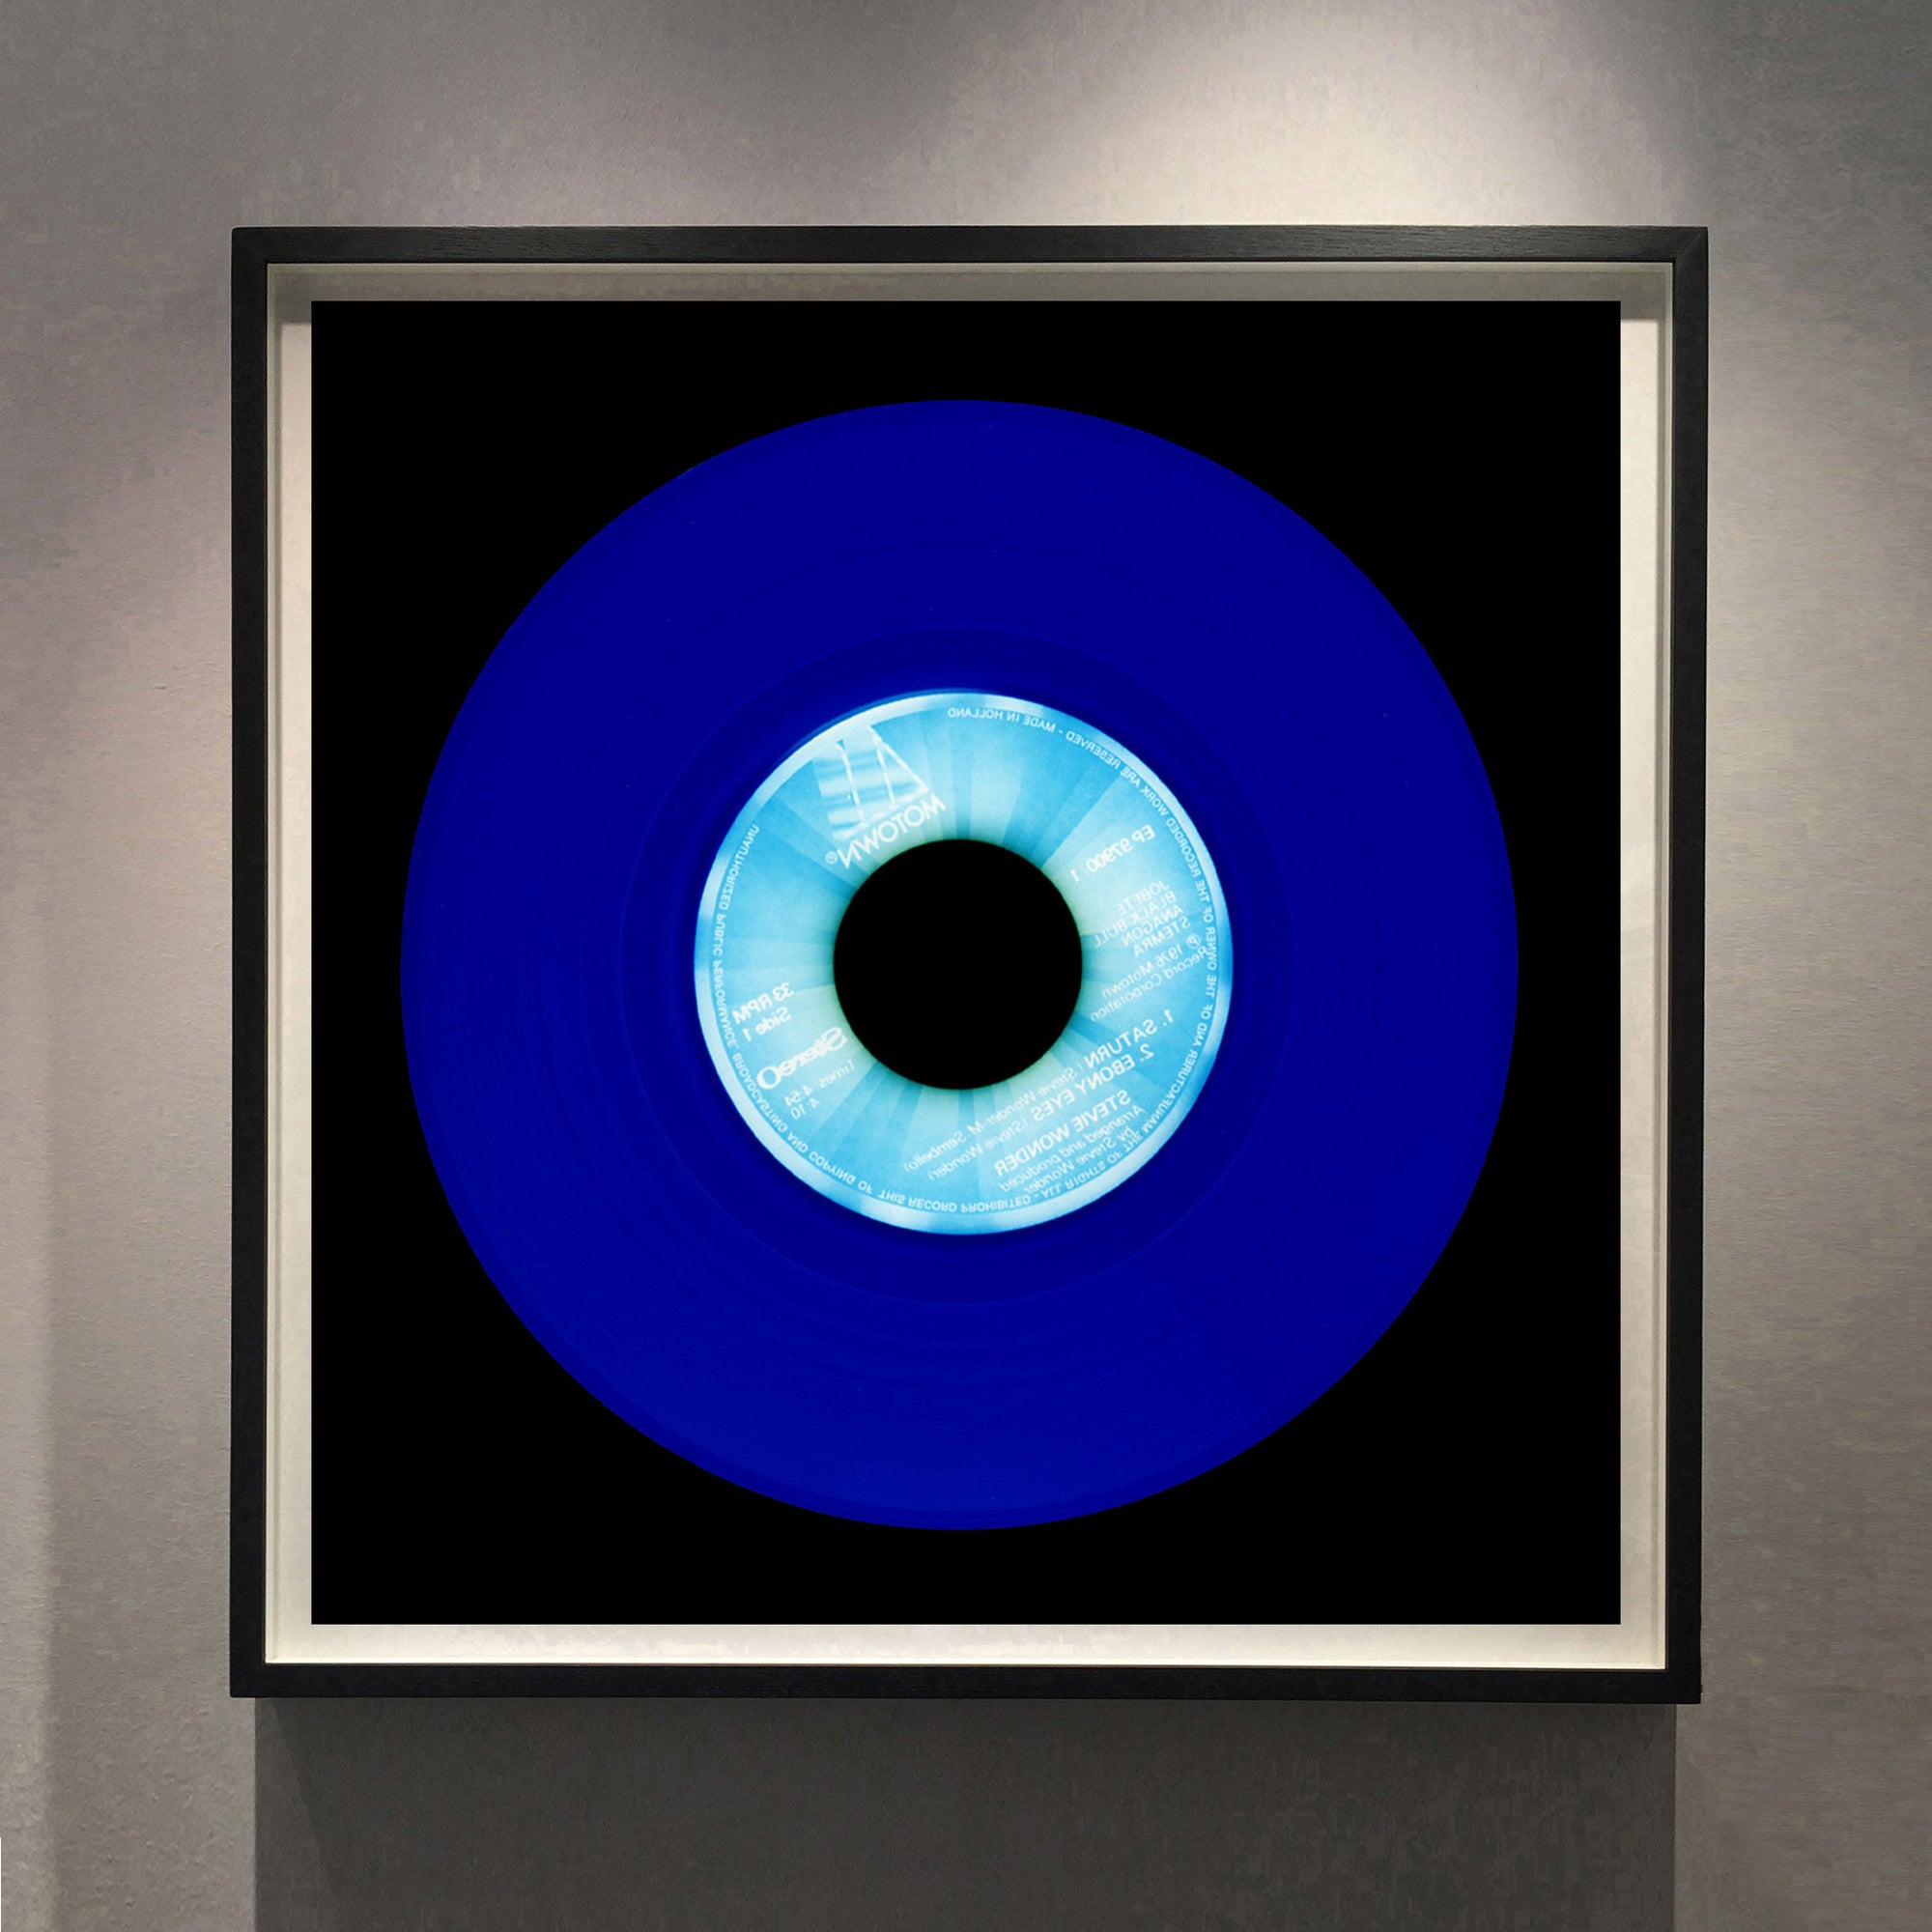 Vinyl Collection 'Made in Holland' (Blue), 2016. Acclaimed contemporary photographers, Richard Heeps and Natasha Heidler have collaborated to make this beautifully mesmerising collection. A celebration of the vinyl record and analogue technology, which reflects the artists practice within photography.